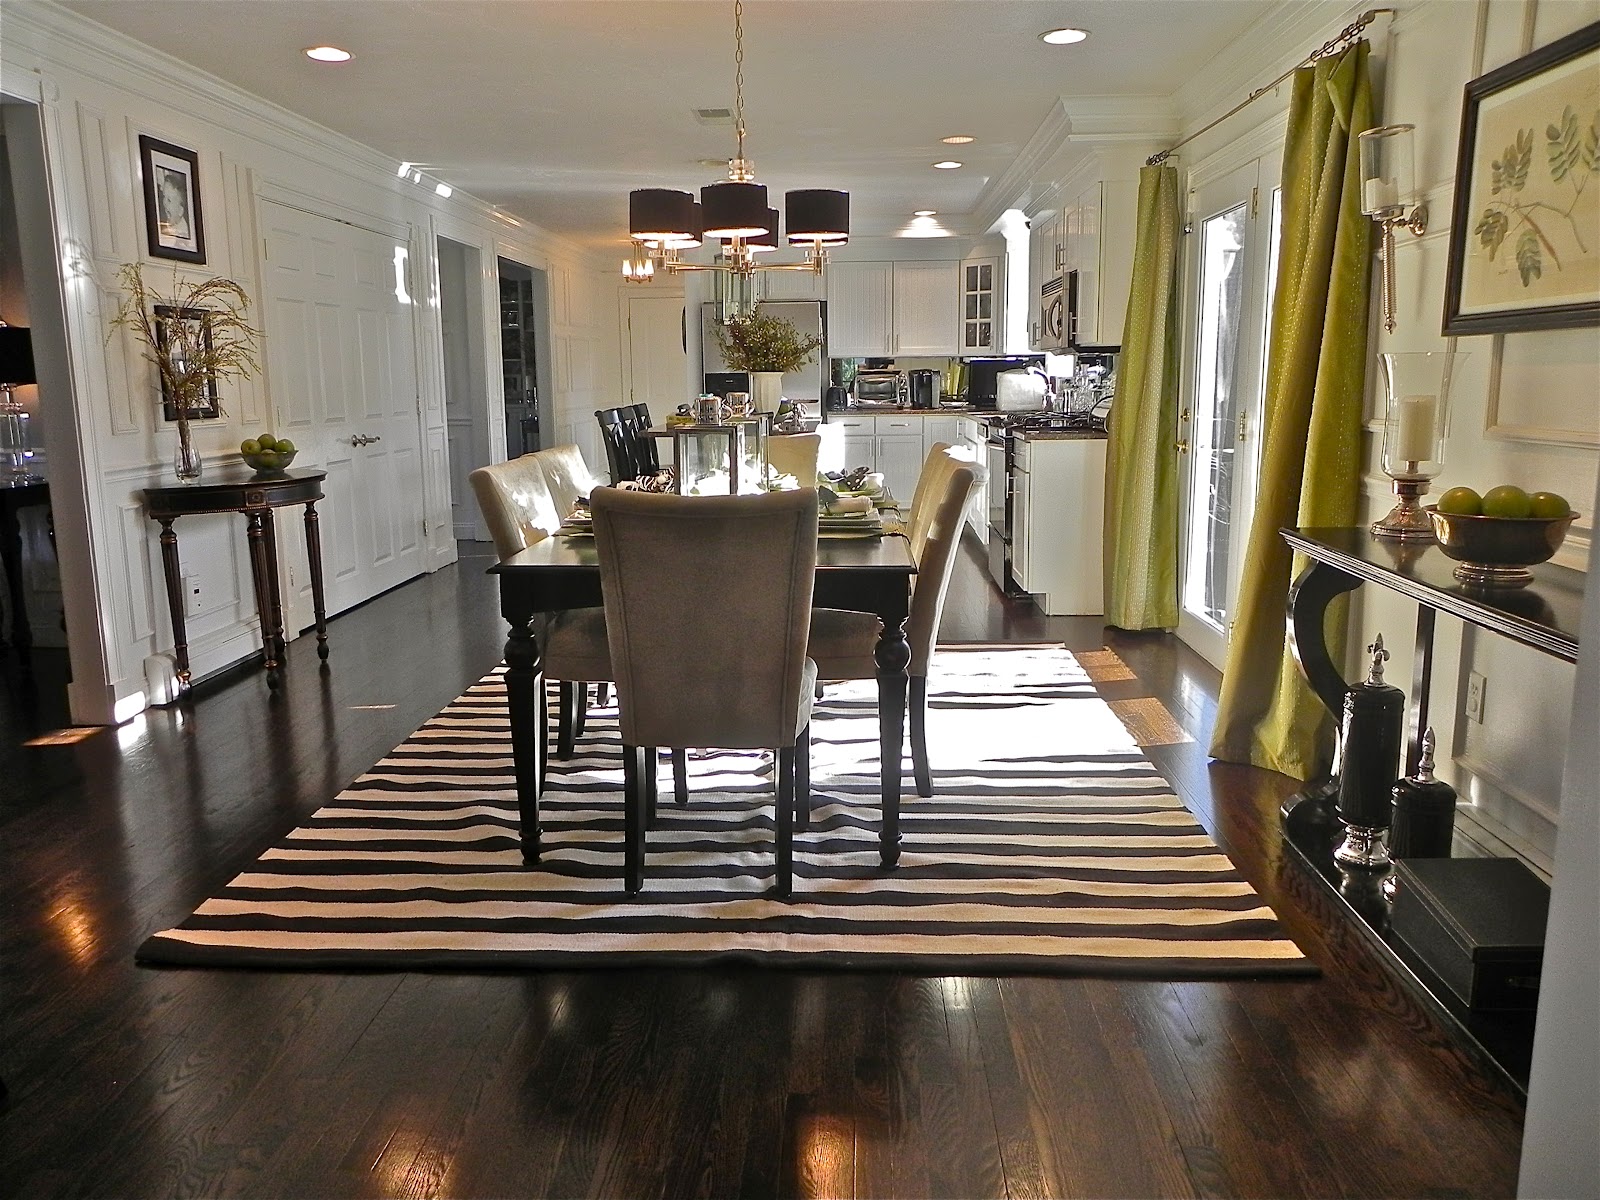 A monochrome rug gives your dining room a glamorous look